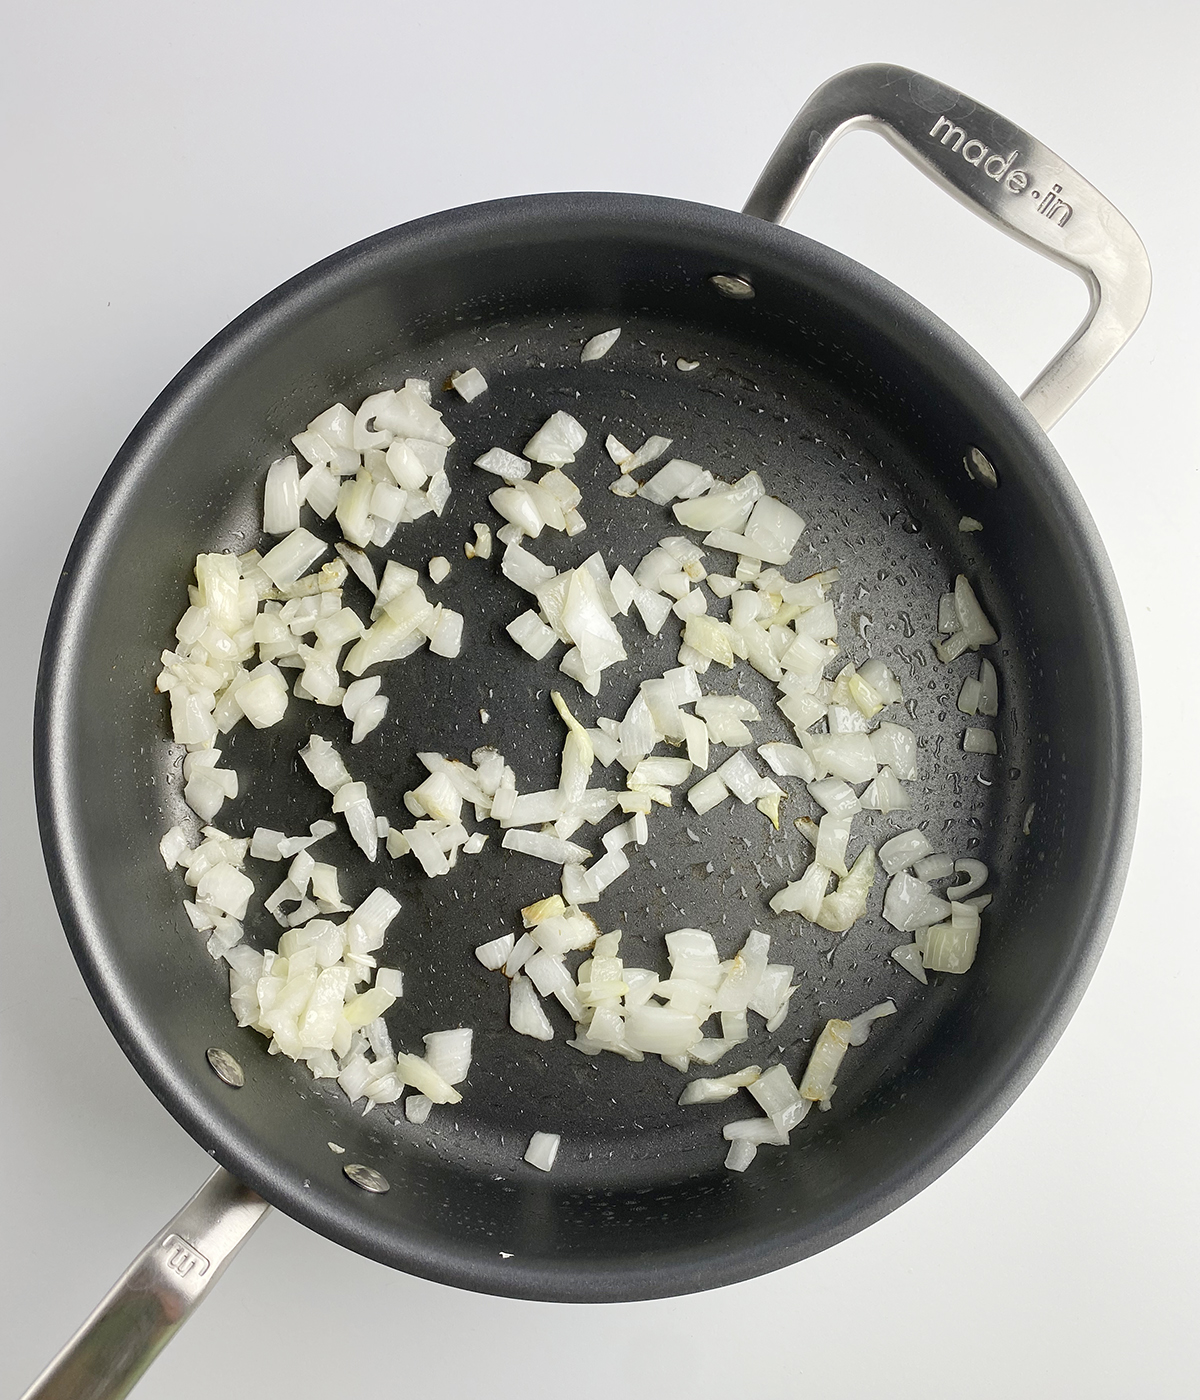 Chopped onions cooking in a skillet.